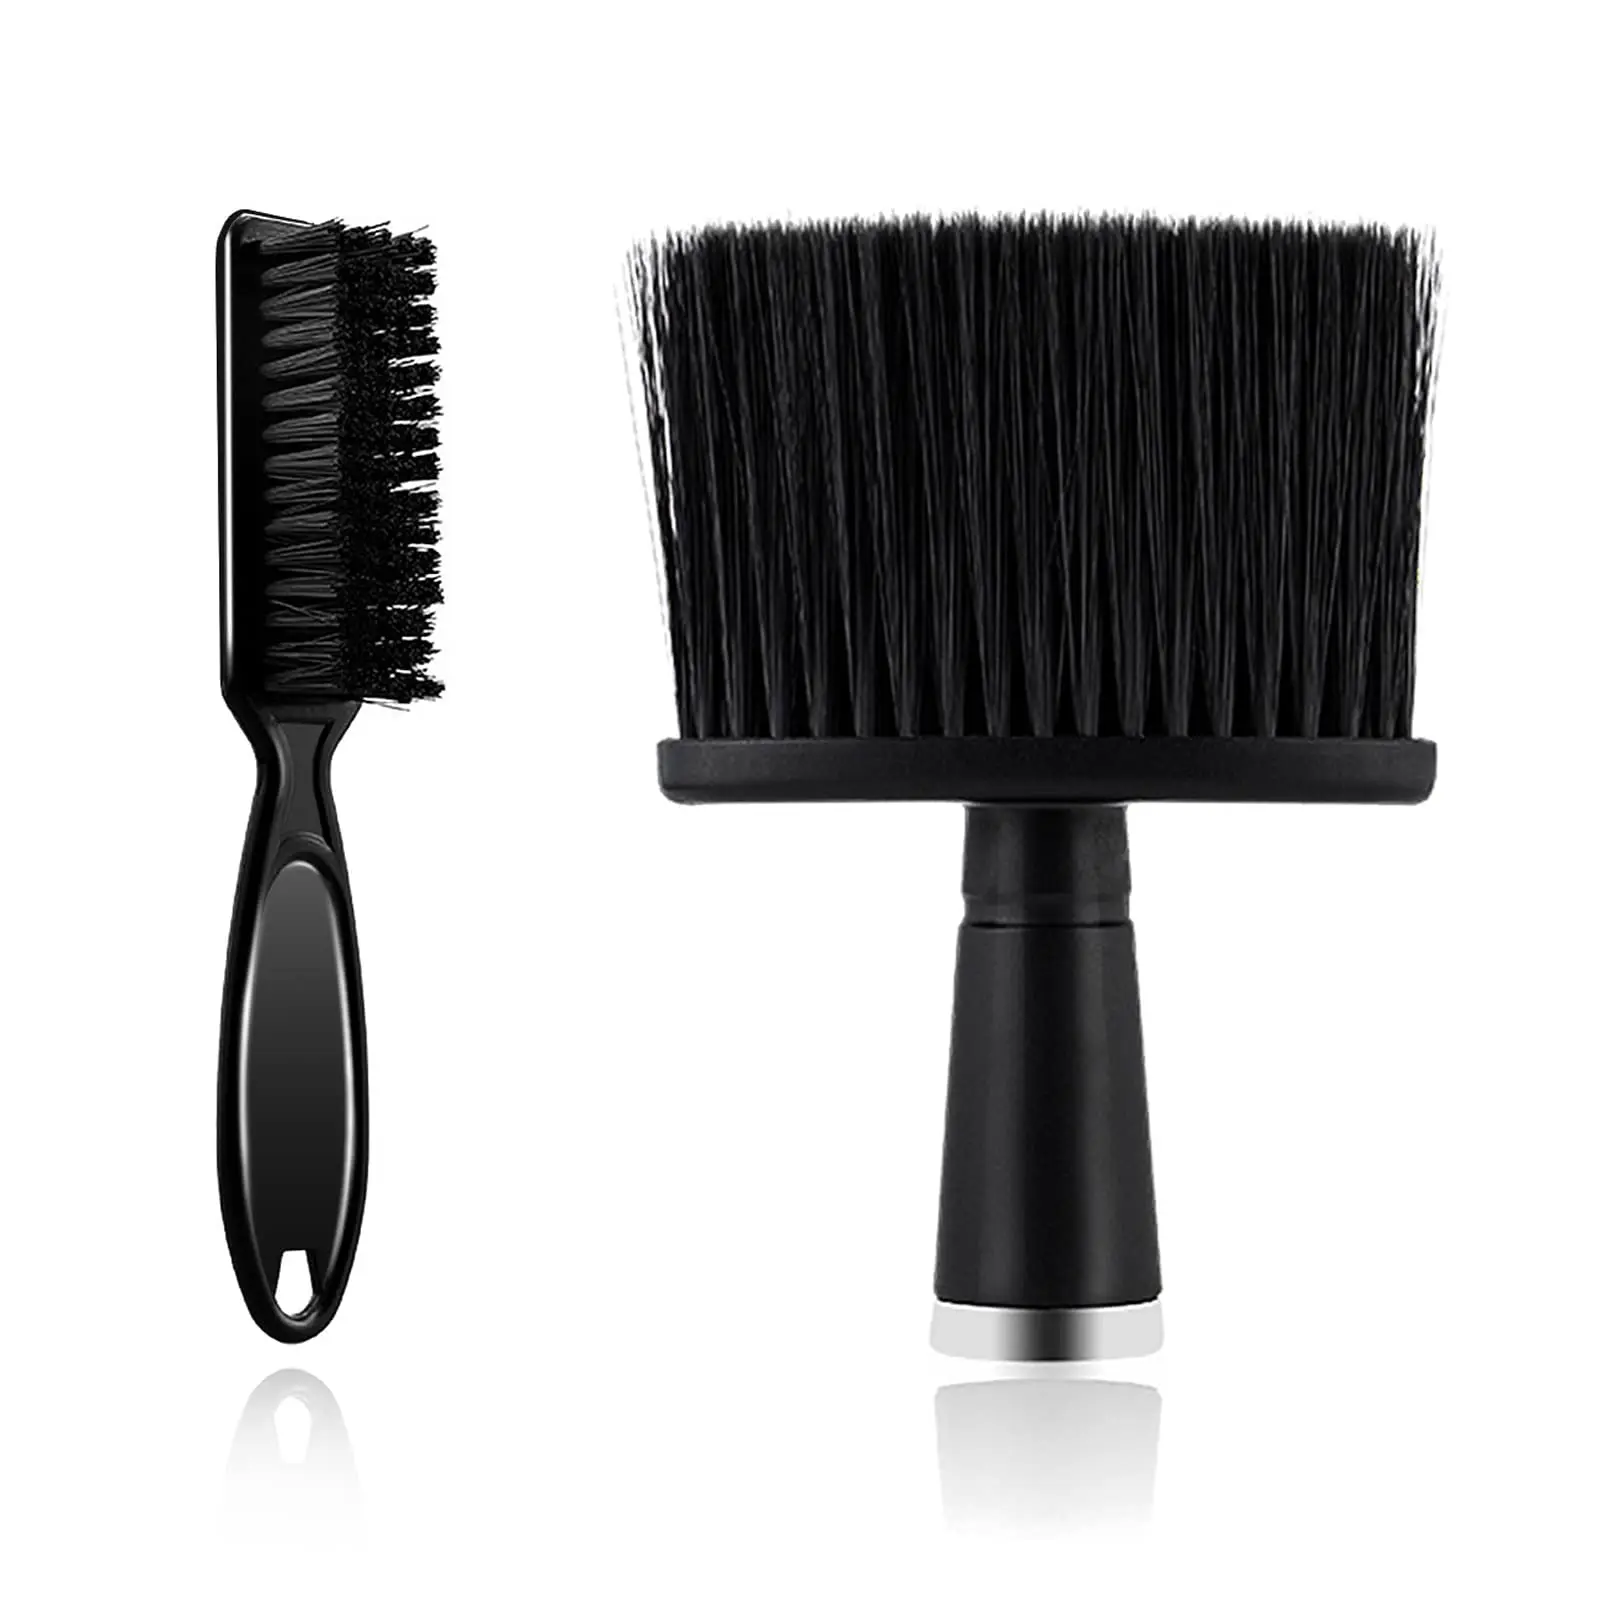 2PCS/Set Barber Brush Hairdresser Blade Clean Brush Neck Duster Brushes Clipper Cleaning Brush Styling Brush Tool intelligent constant temperature cooling and heating dual purpose fan without fan blade hanging neck fan warm water treasure